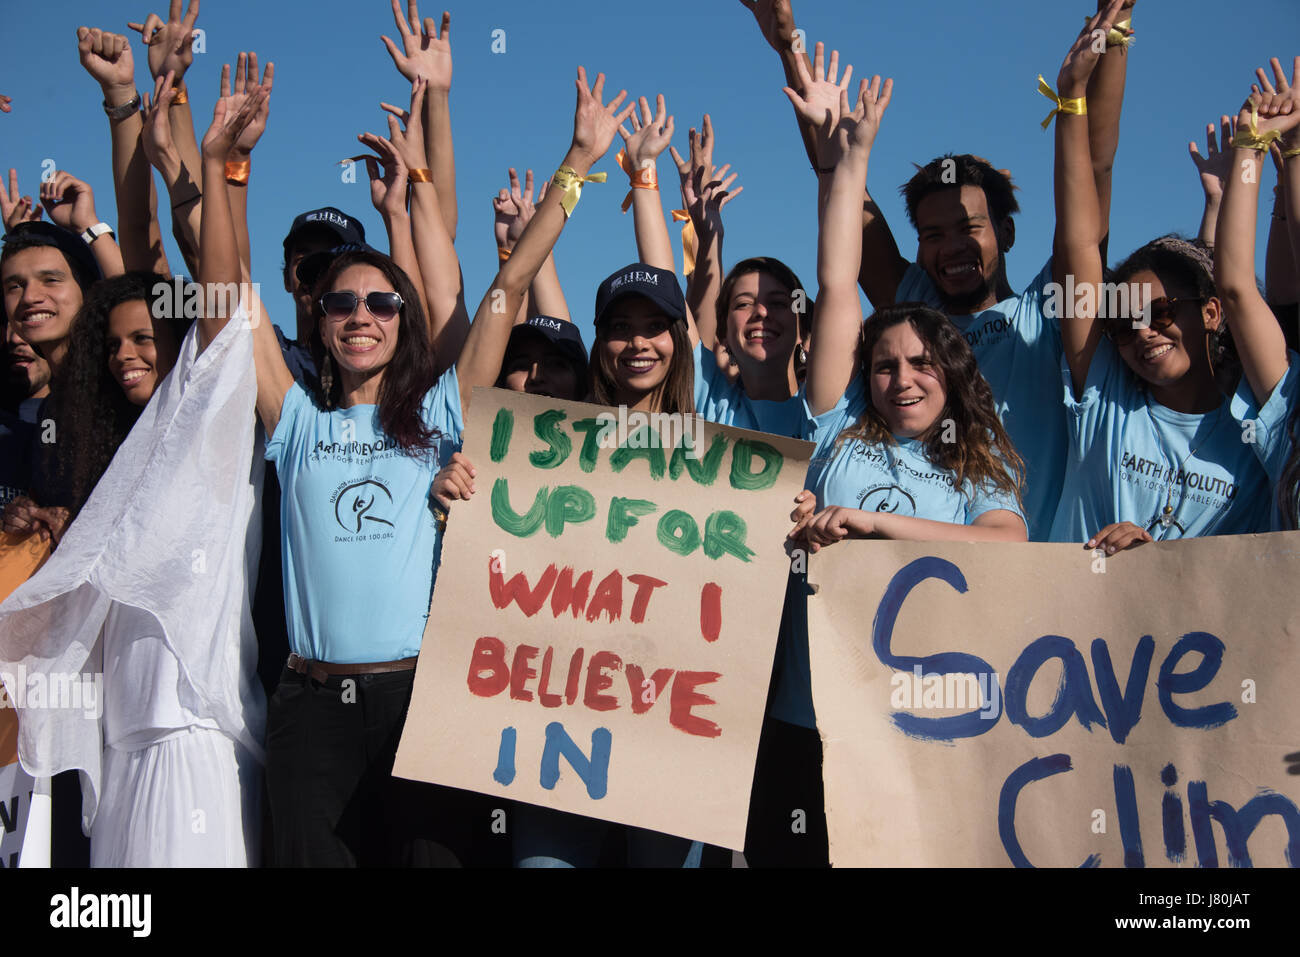 Young activists at the COP22 UN climate conference hold a sign reading 'I Stand Up For What I Believe In' at a demonstration in Jemaa el-Fnaa, the central market plaza in Marrakech, Morocco, November 10, 2016. Stock Photo